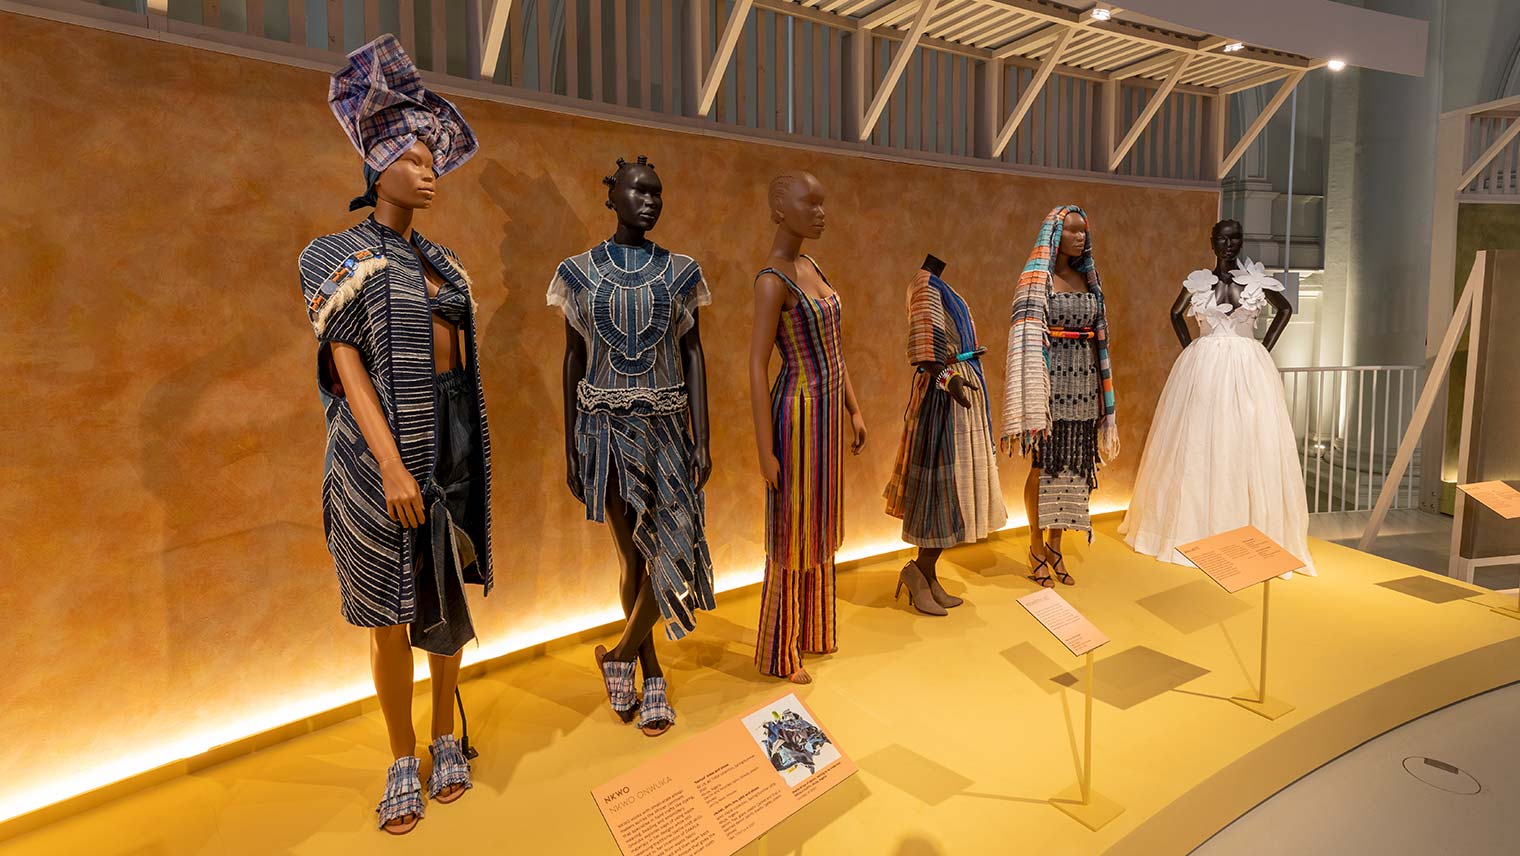 Africa Fashion at the V&A